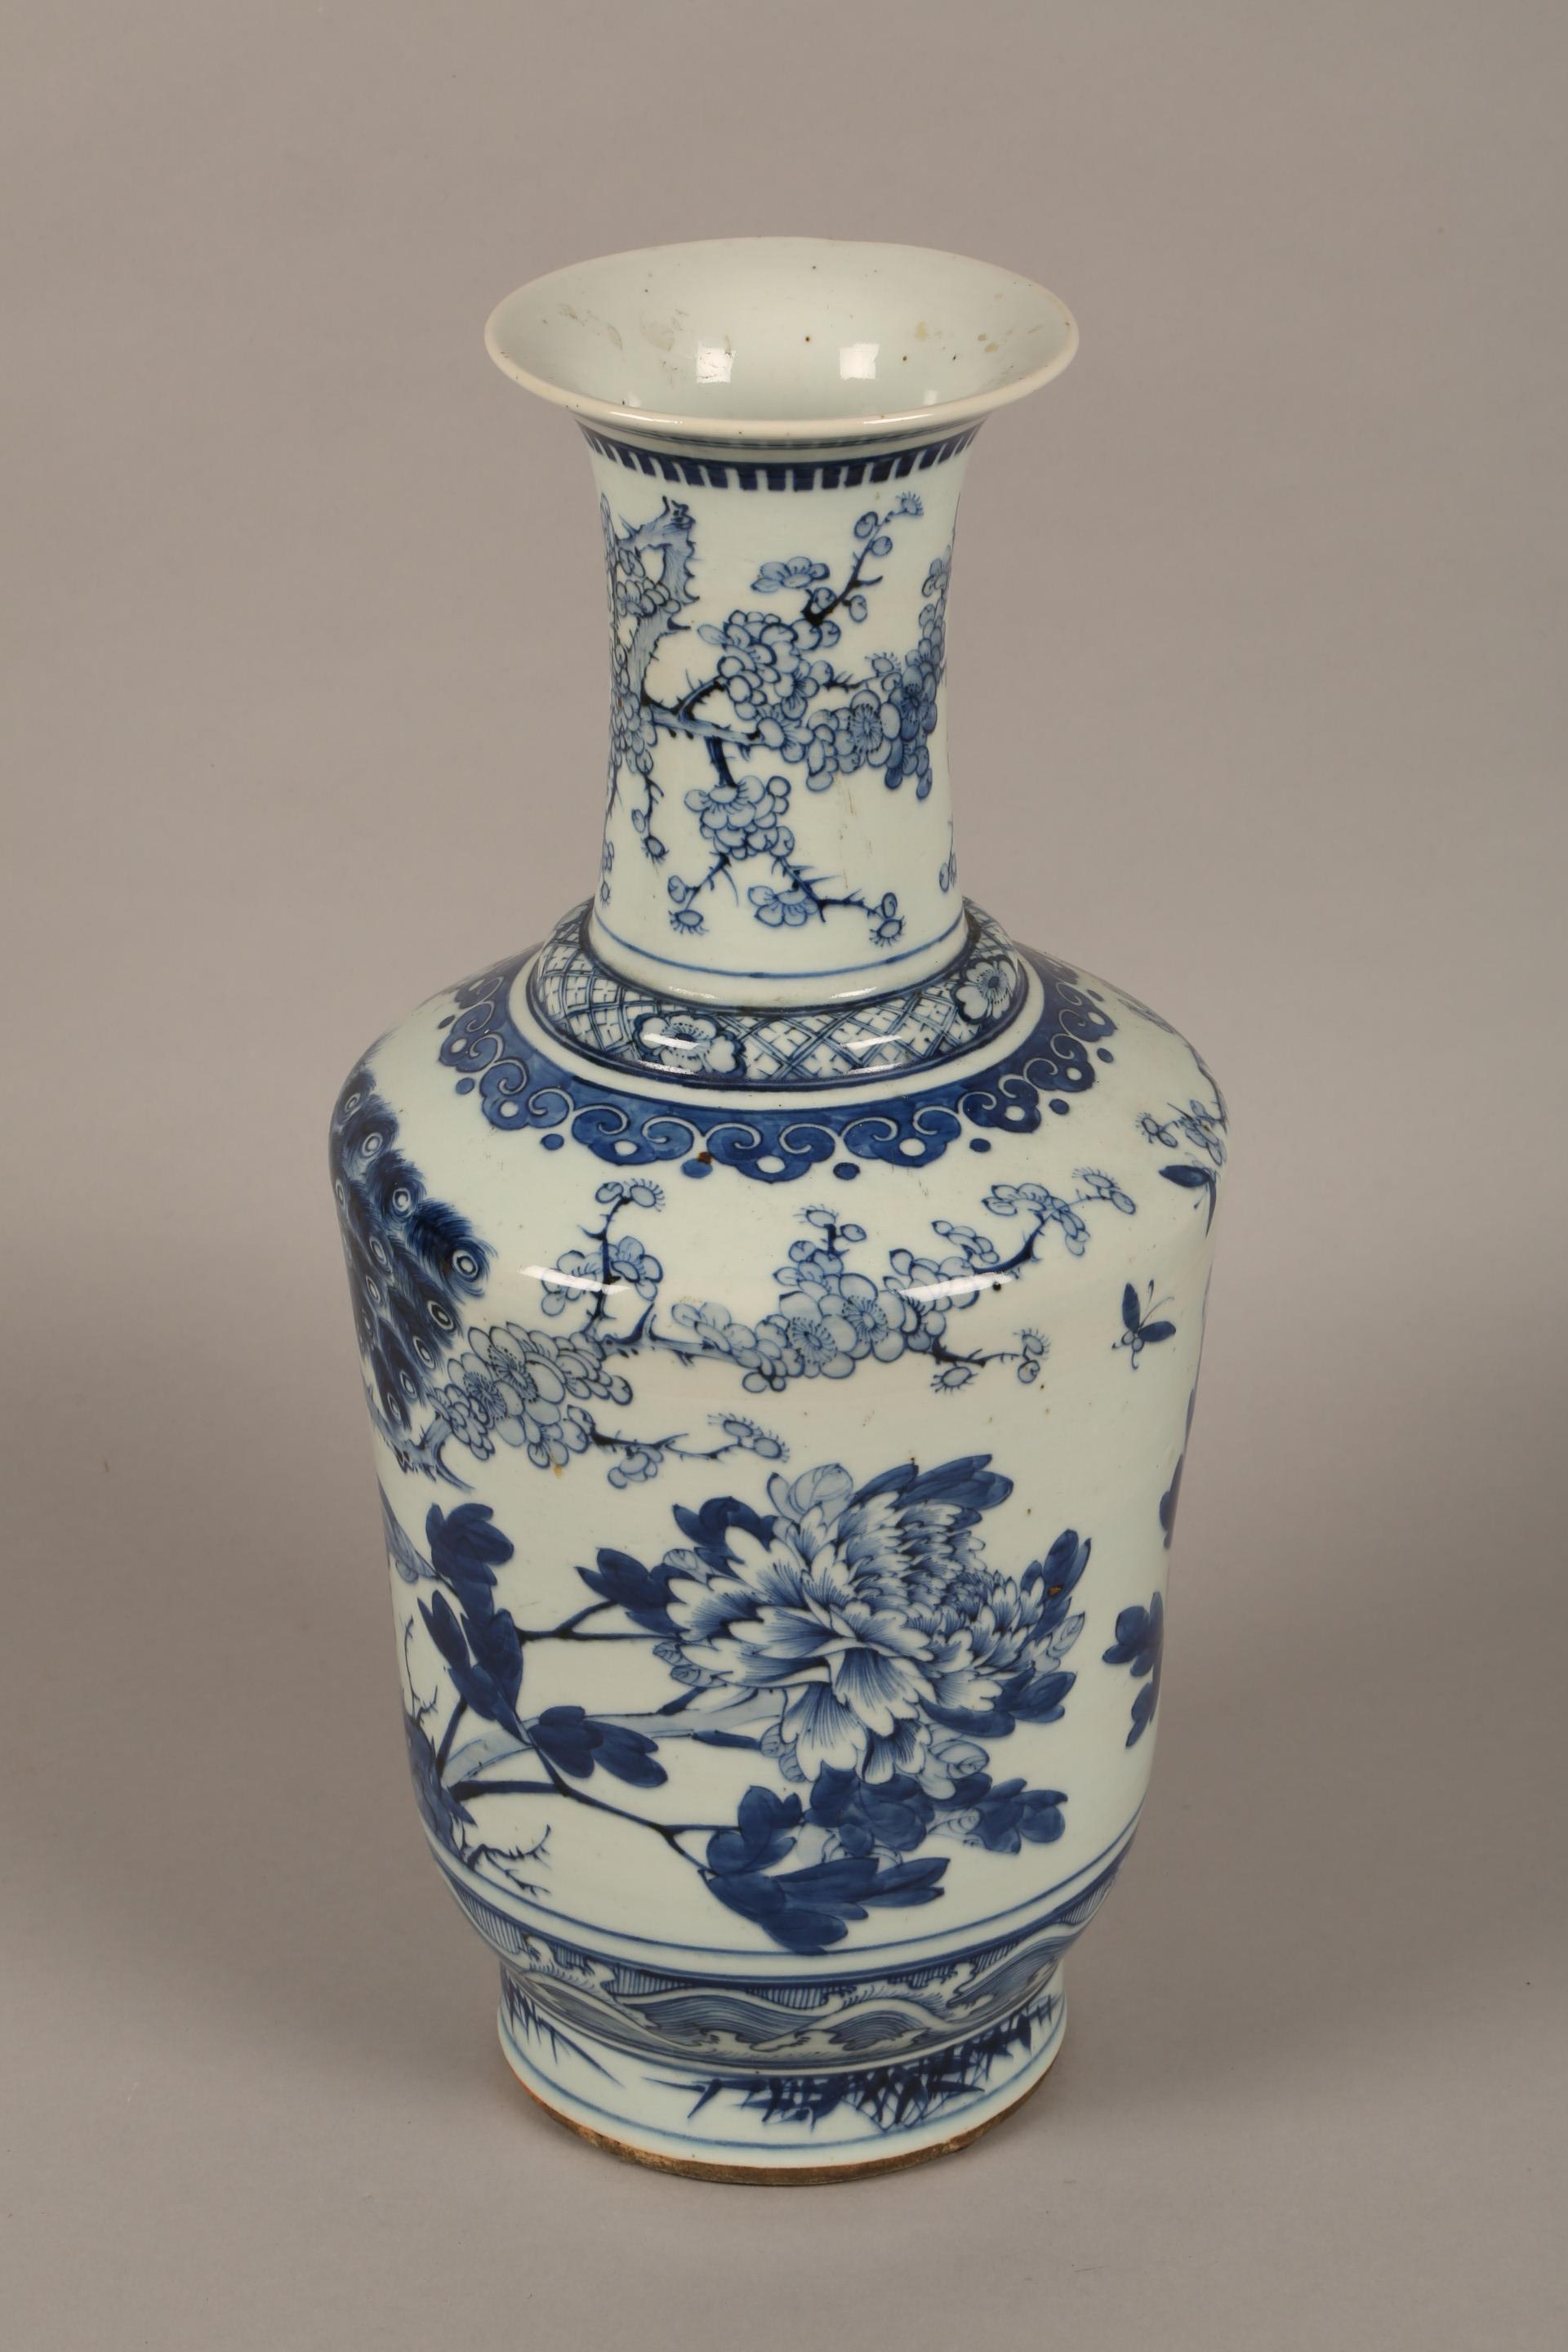 19th/20th century Chinese blue and white vase, decorated with flowering prunus and peonies. 44.5cm - Image 3 of 6